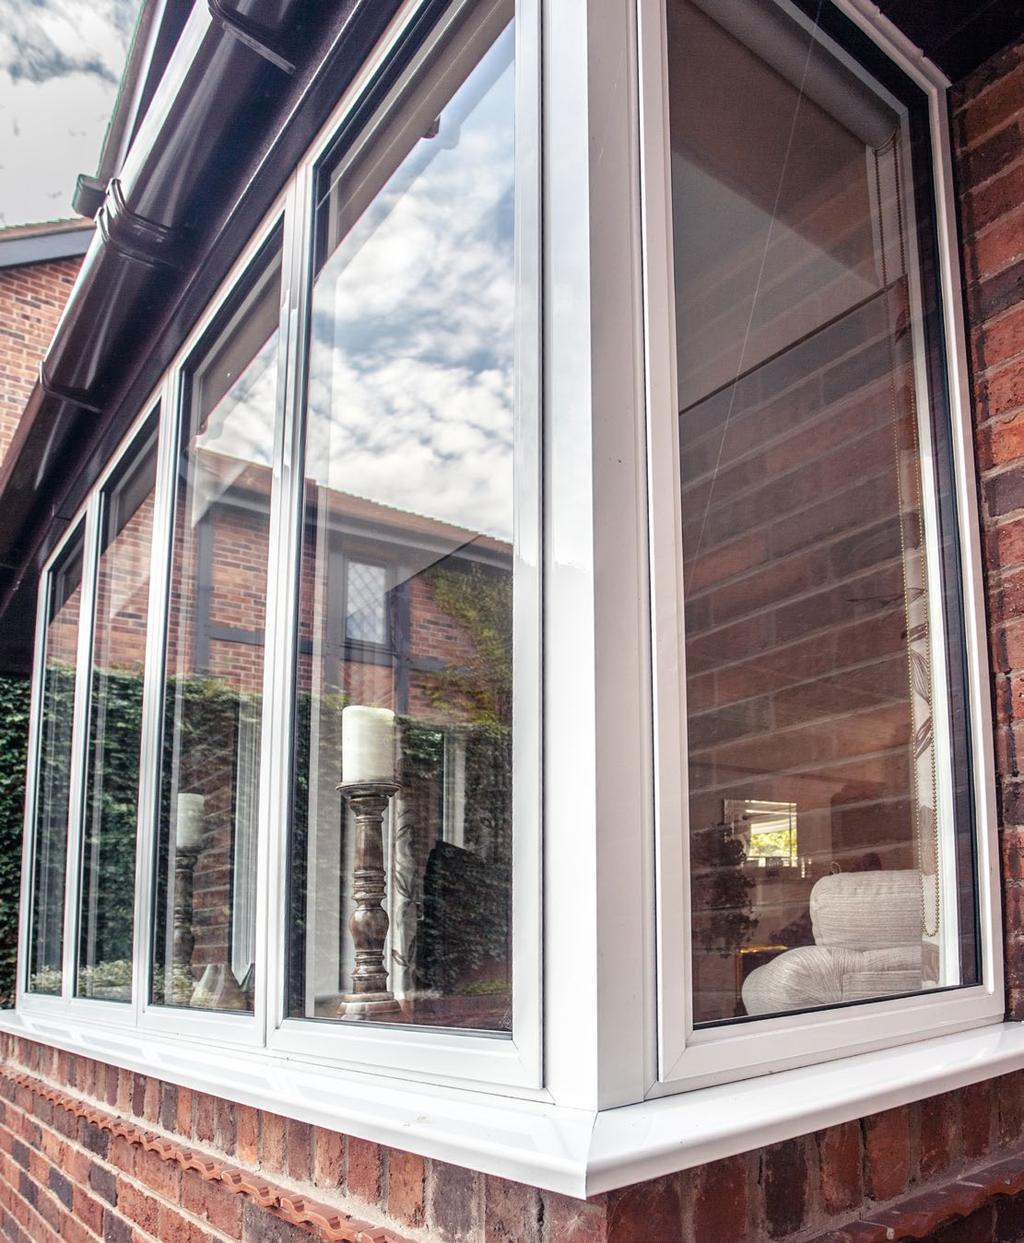 Introduction to Aluminium products Why choose aluminium products? Over recent years, Aluminium has become a popular choice for home owners, property developers and tradespeople.